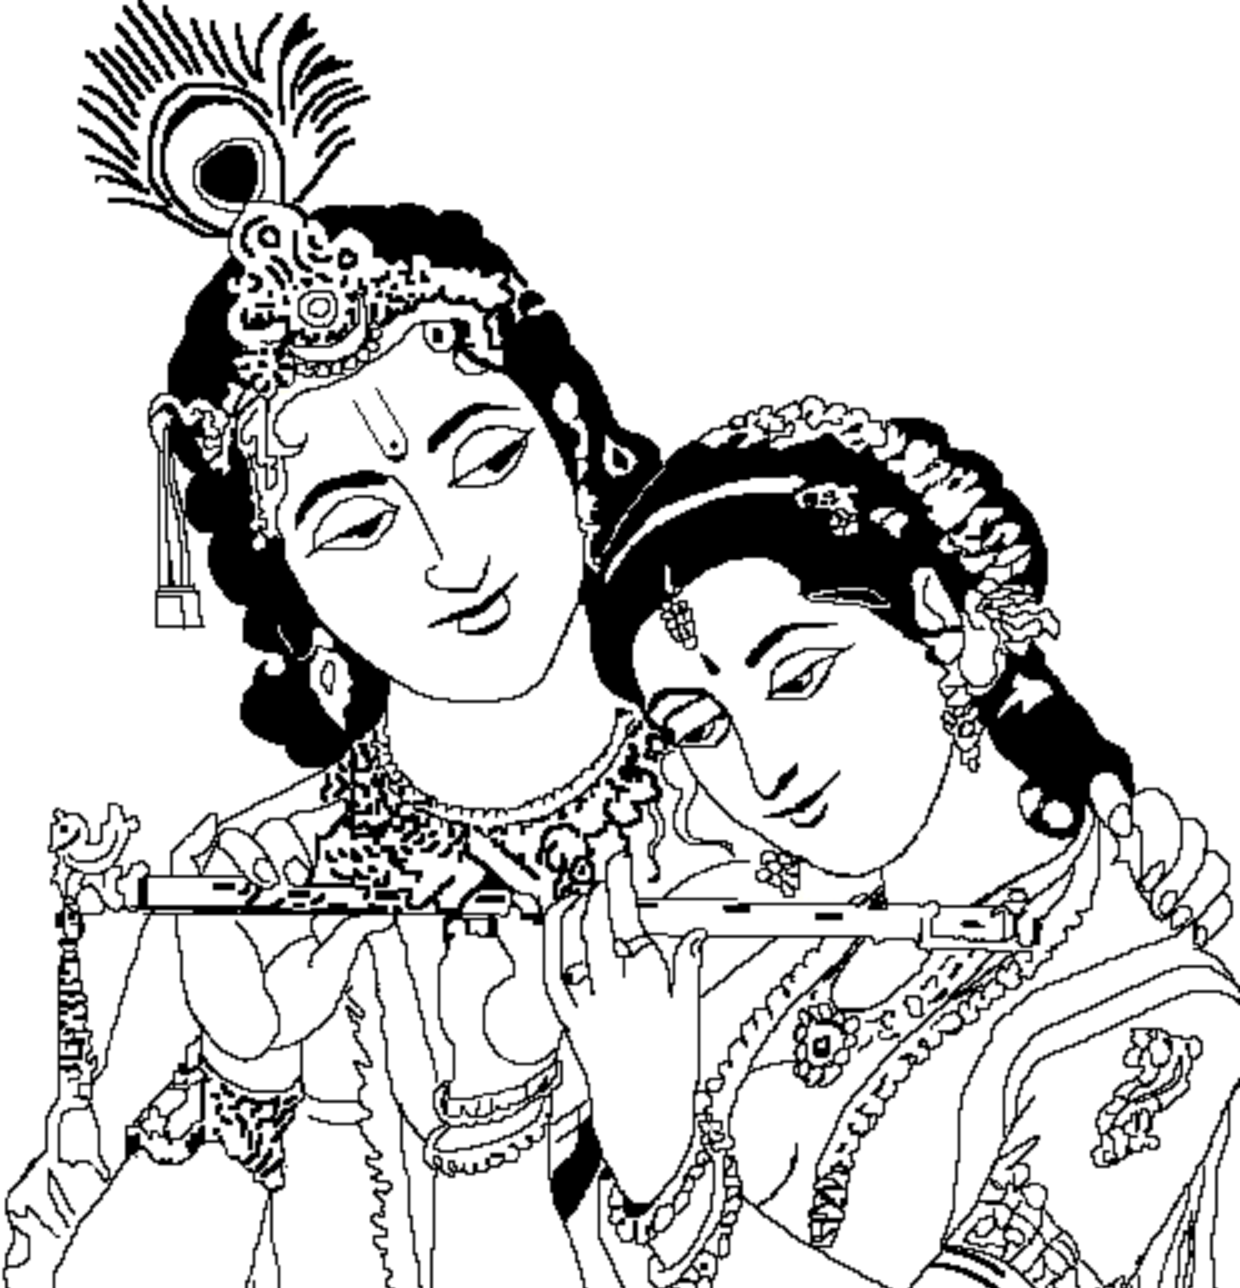 The love story of Radha and Lord Krishna | Times of India